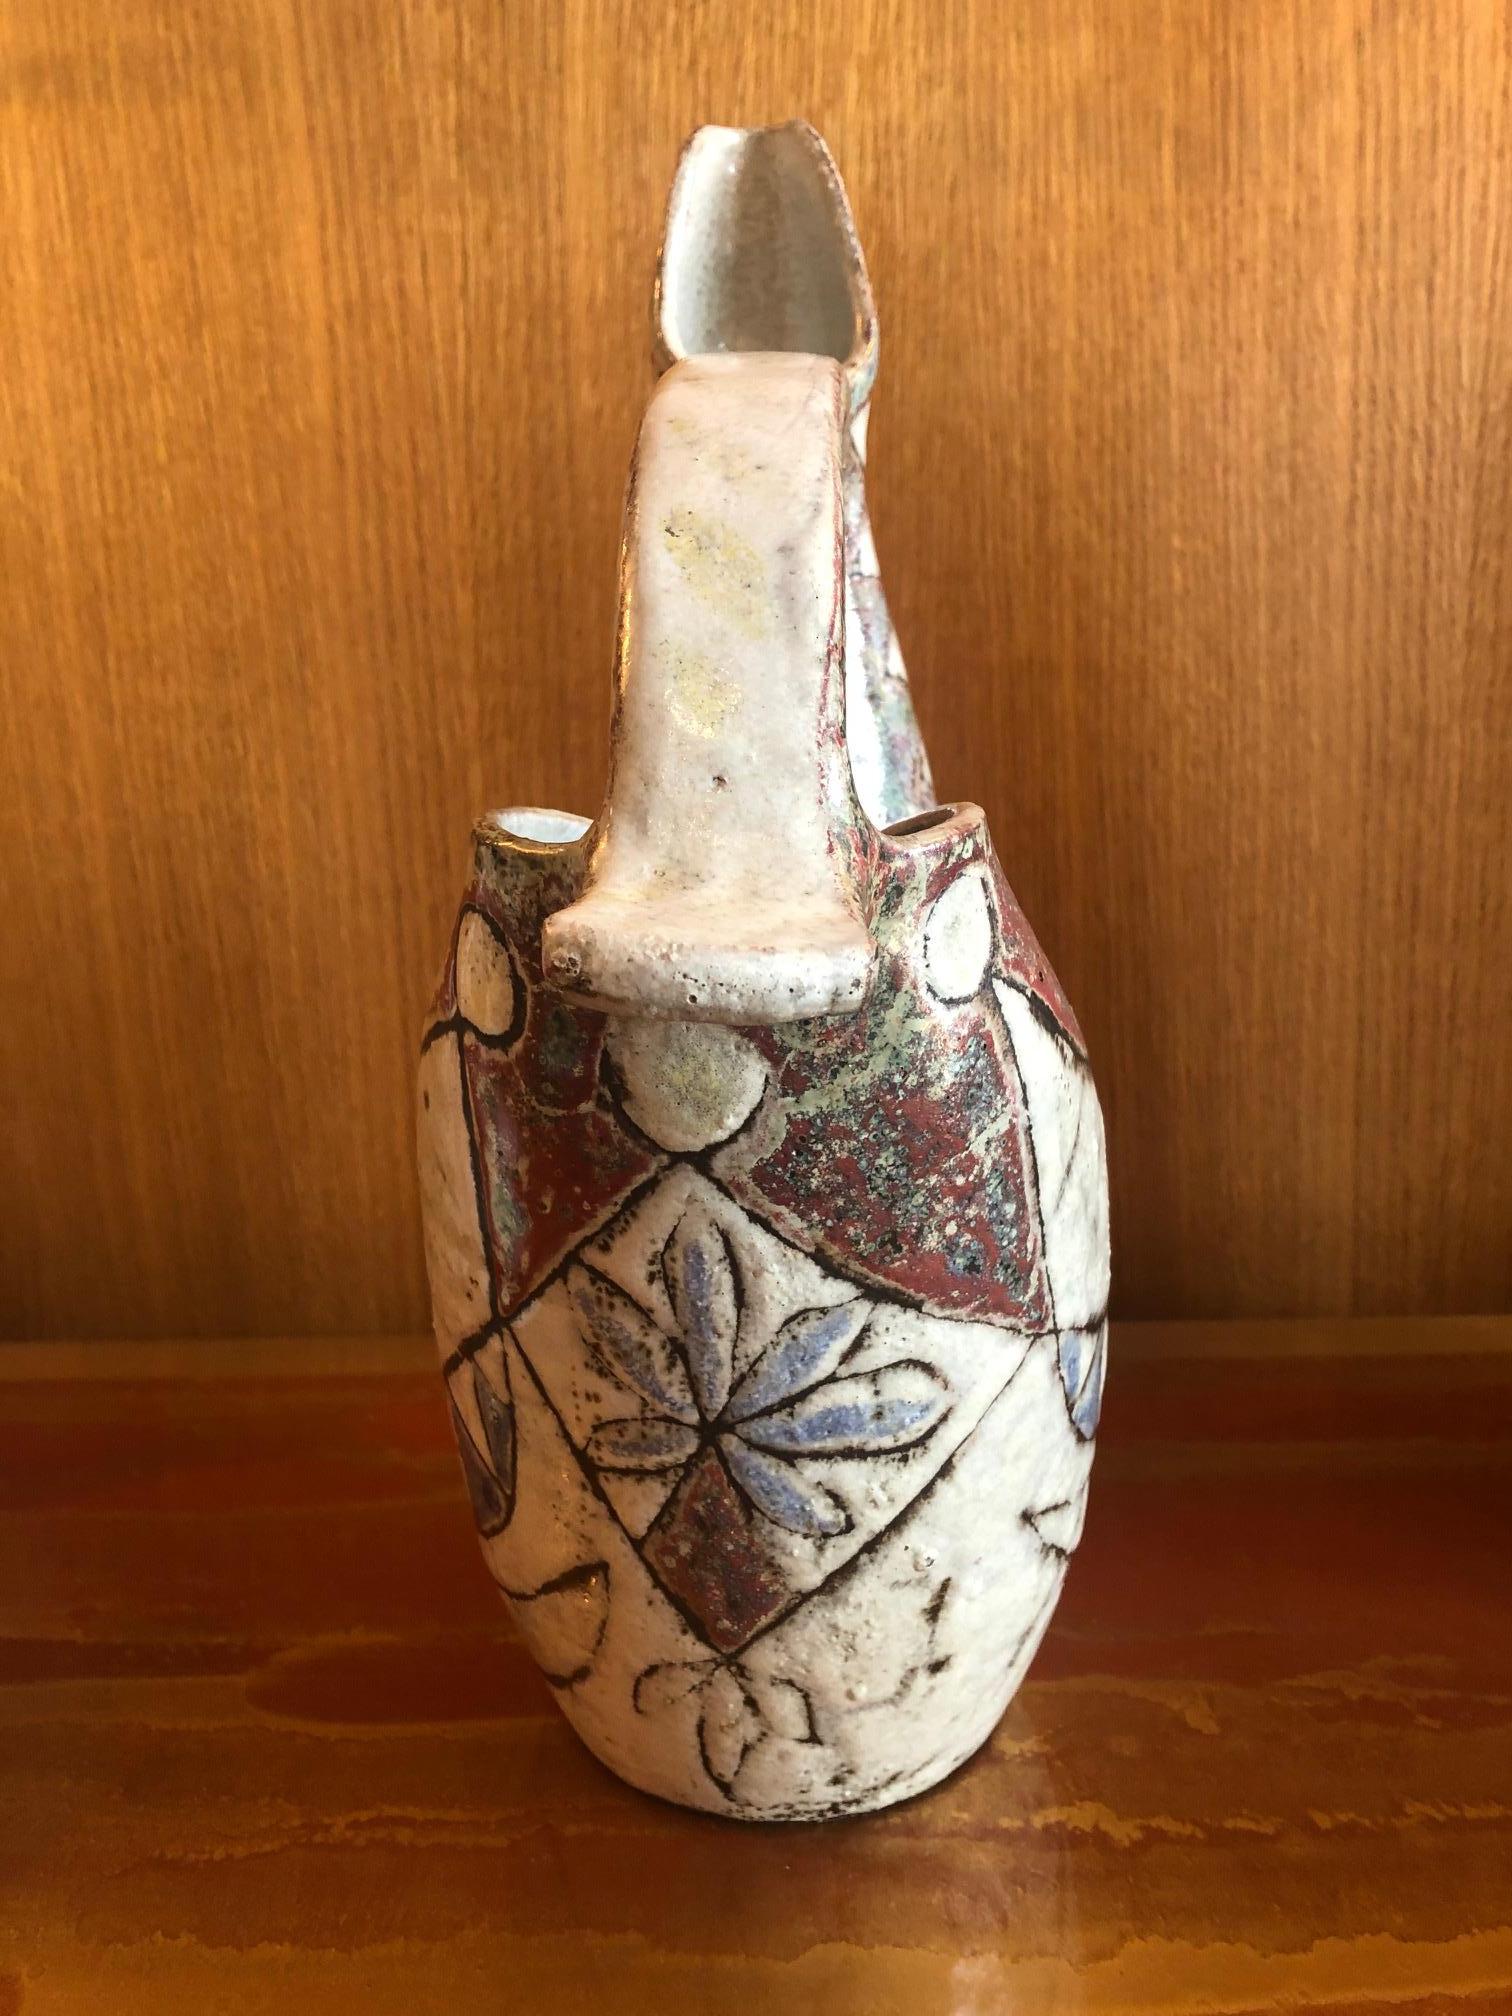 Ceramic vase by Jean Derval, active in Vallauris, France, during the 1960s.